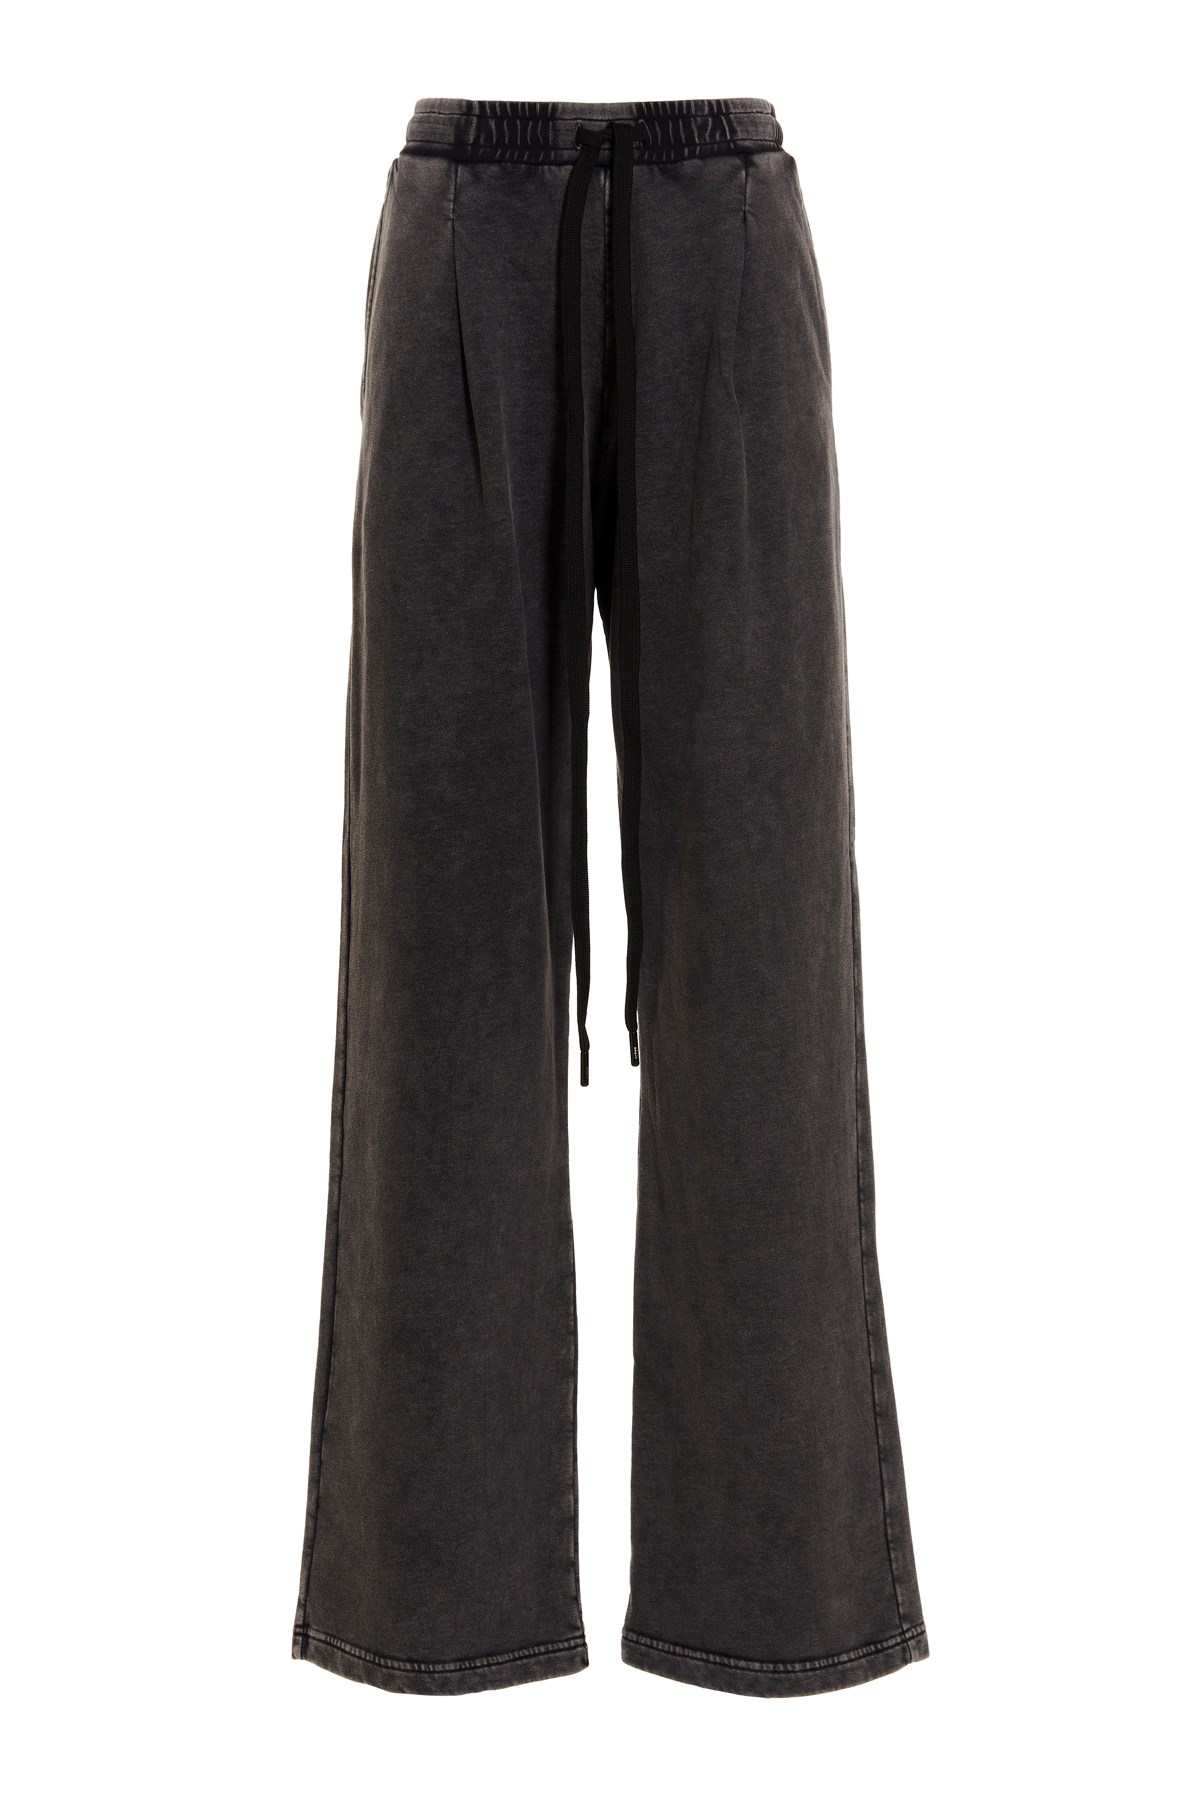 R13 'Pleated Wide Leg’ Joggers